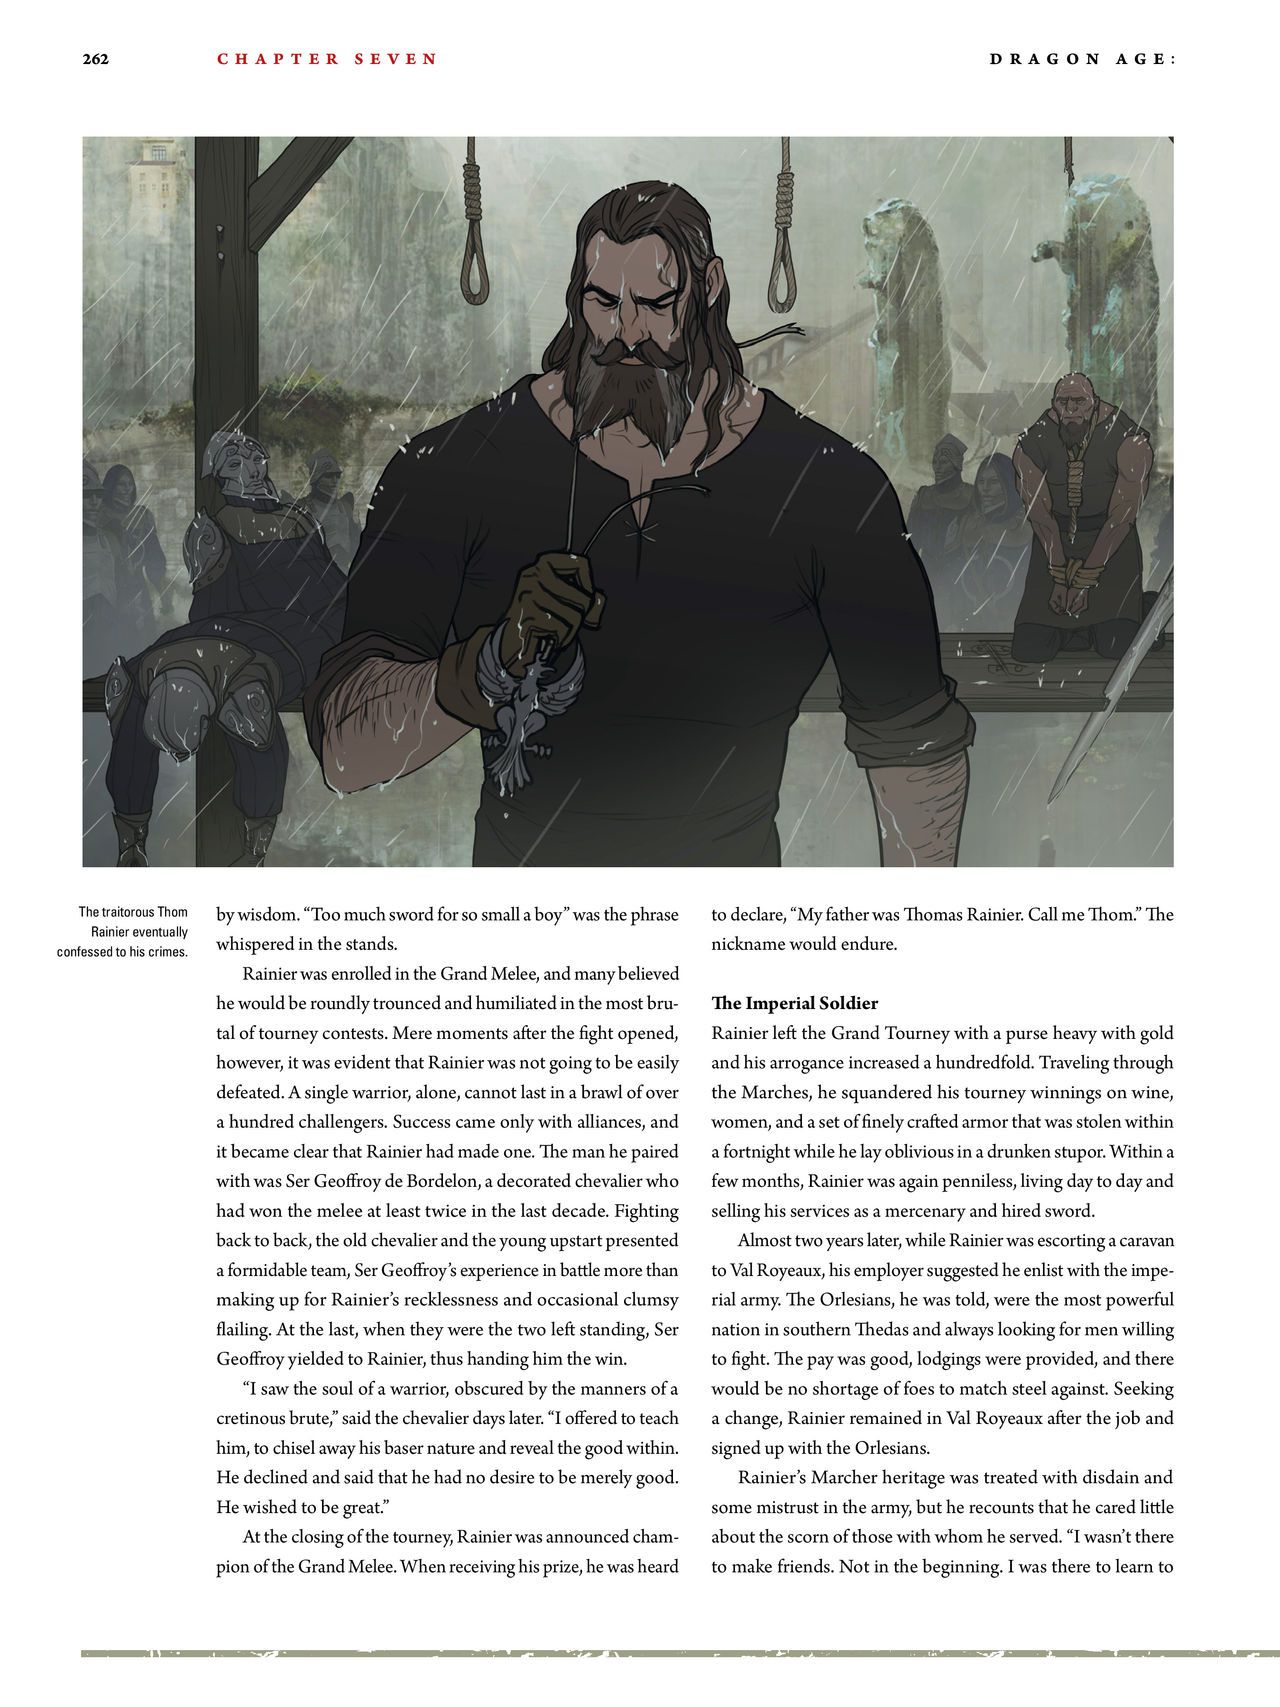 Dragon Age - The World of Thedas v02 255